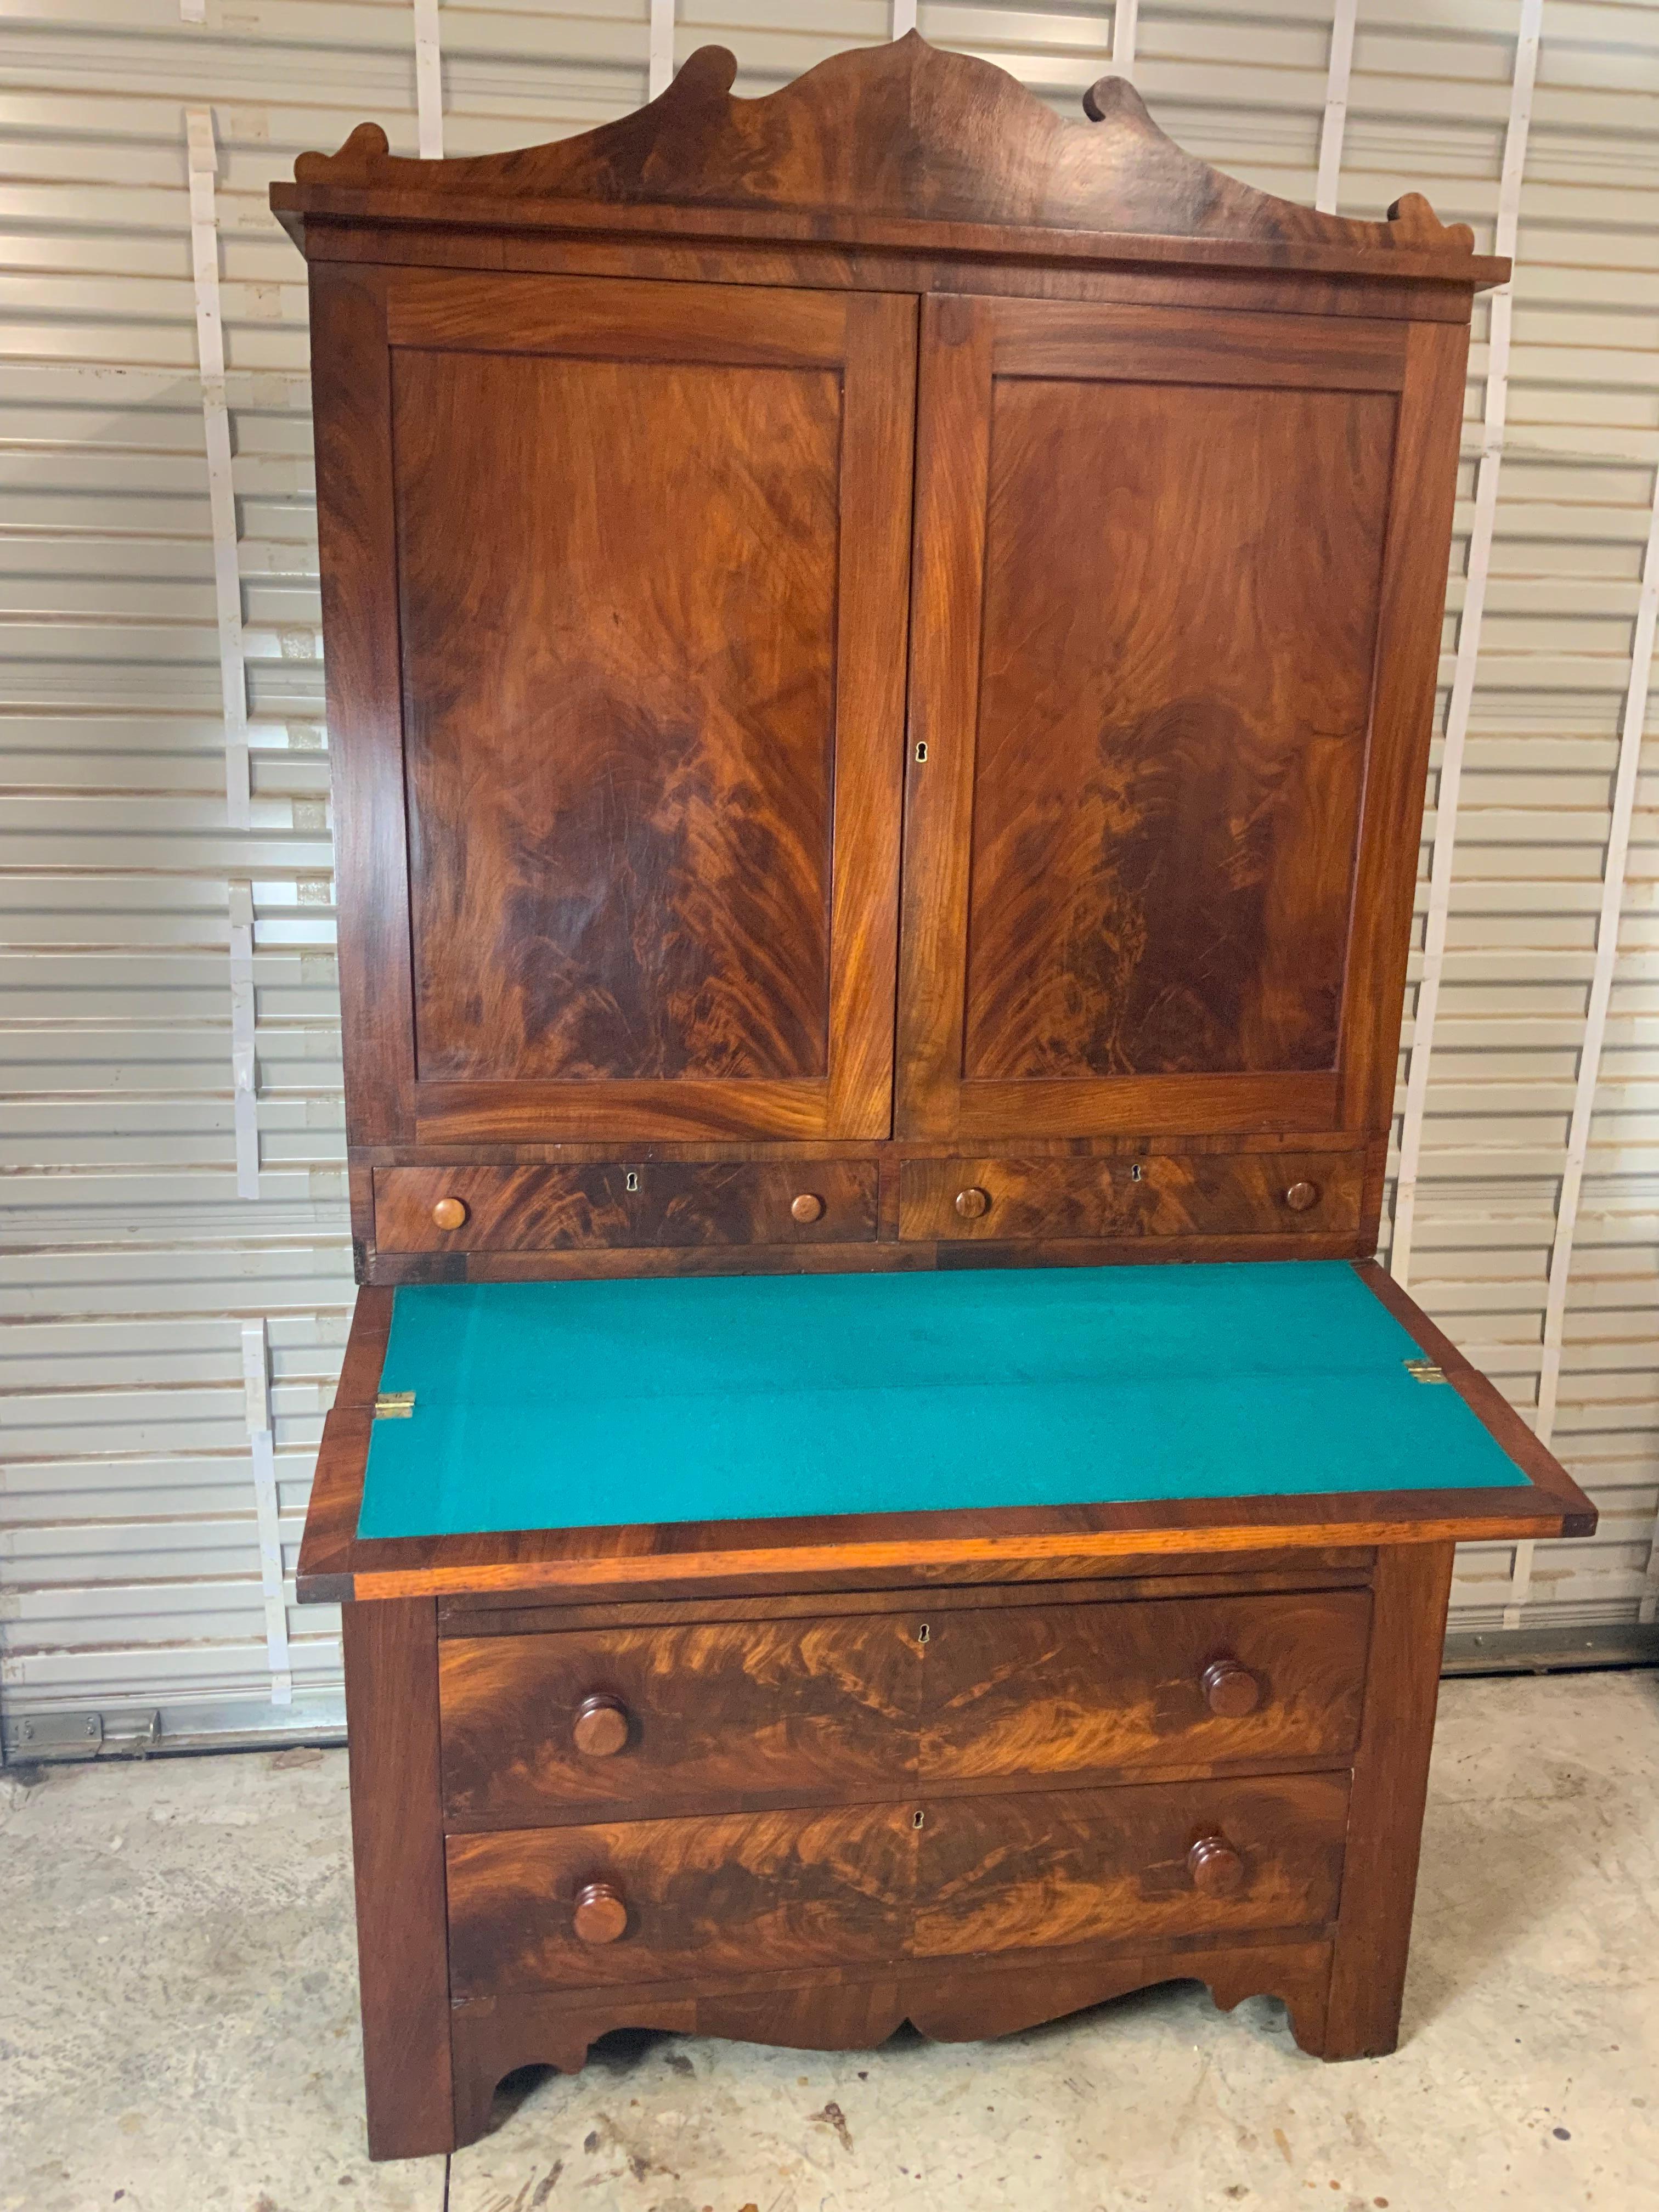 A very handsome late American Empire Mahogany Secretary Desk. Very good condition overall with an old refinished surface exhibiting a beautiful color and patina to the figured Mahogany.  Poplar and white Pine case wood and drawer construction.  All